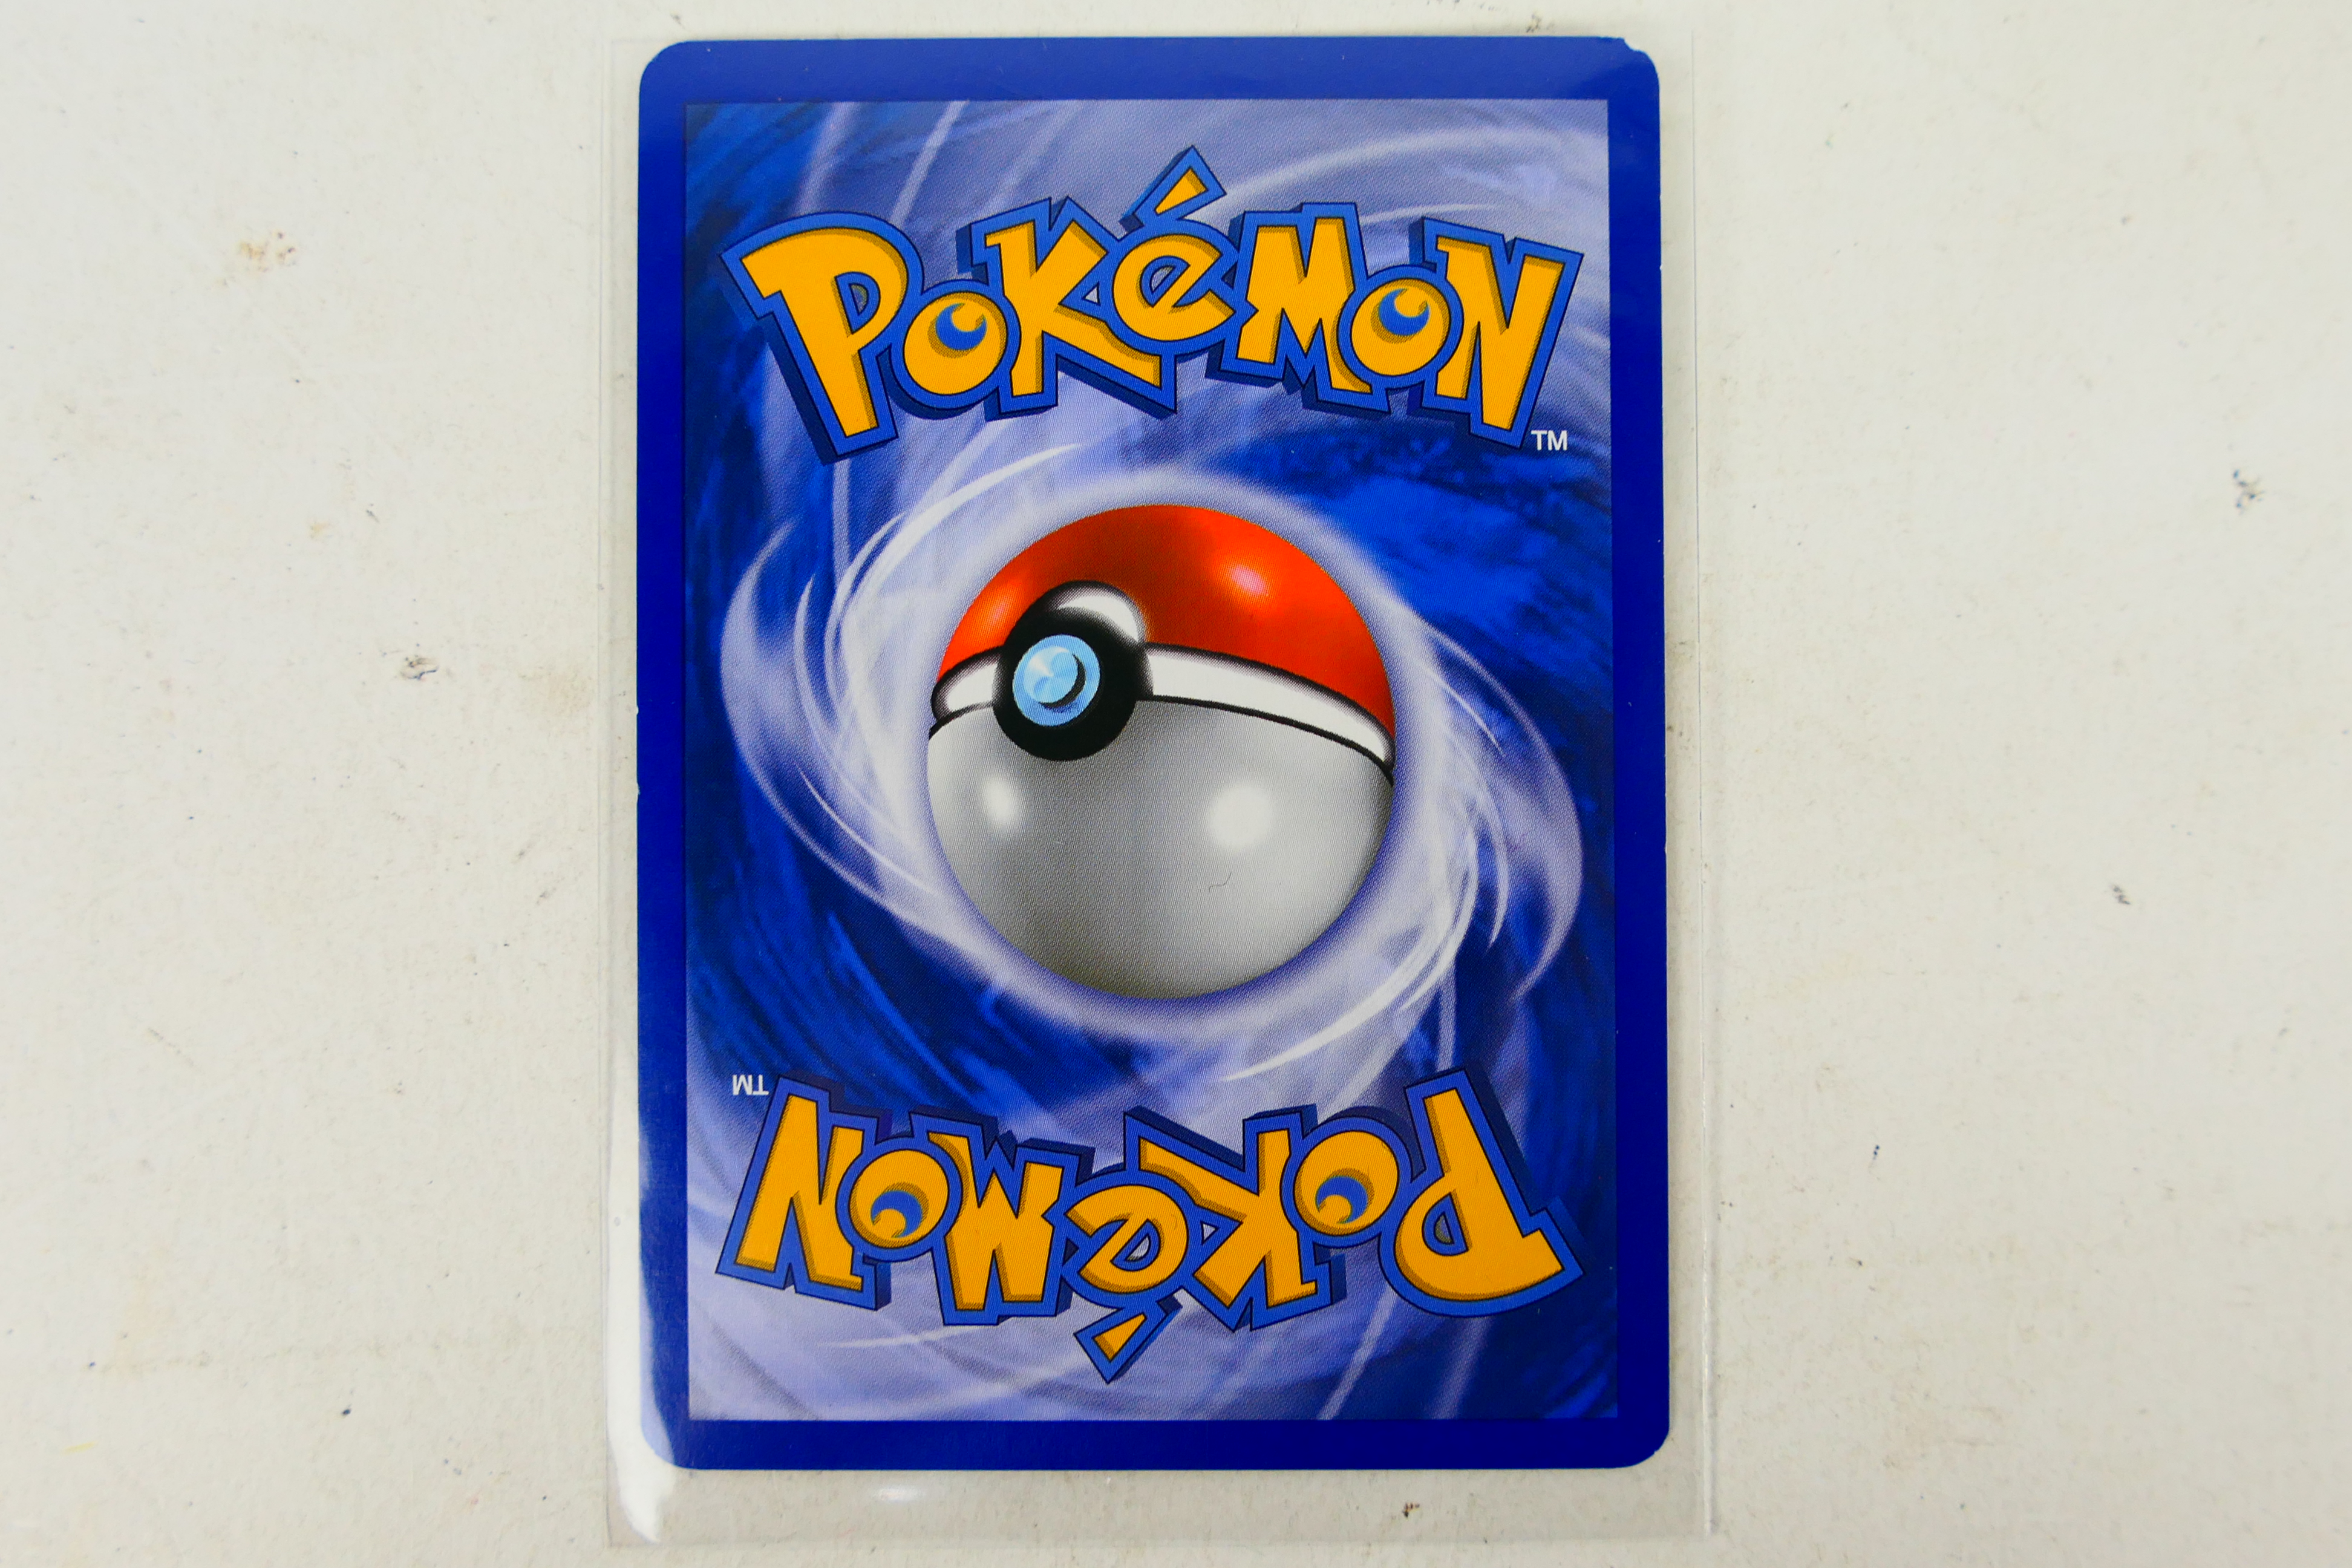 Pokemon - A Pokemon Battle Road Victory Medal Trainer Card for Spring 2009 / 2010, - Image 5 of 5